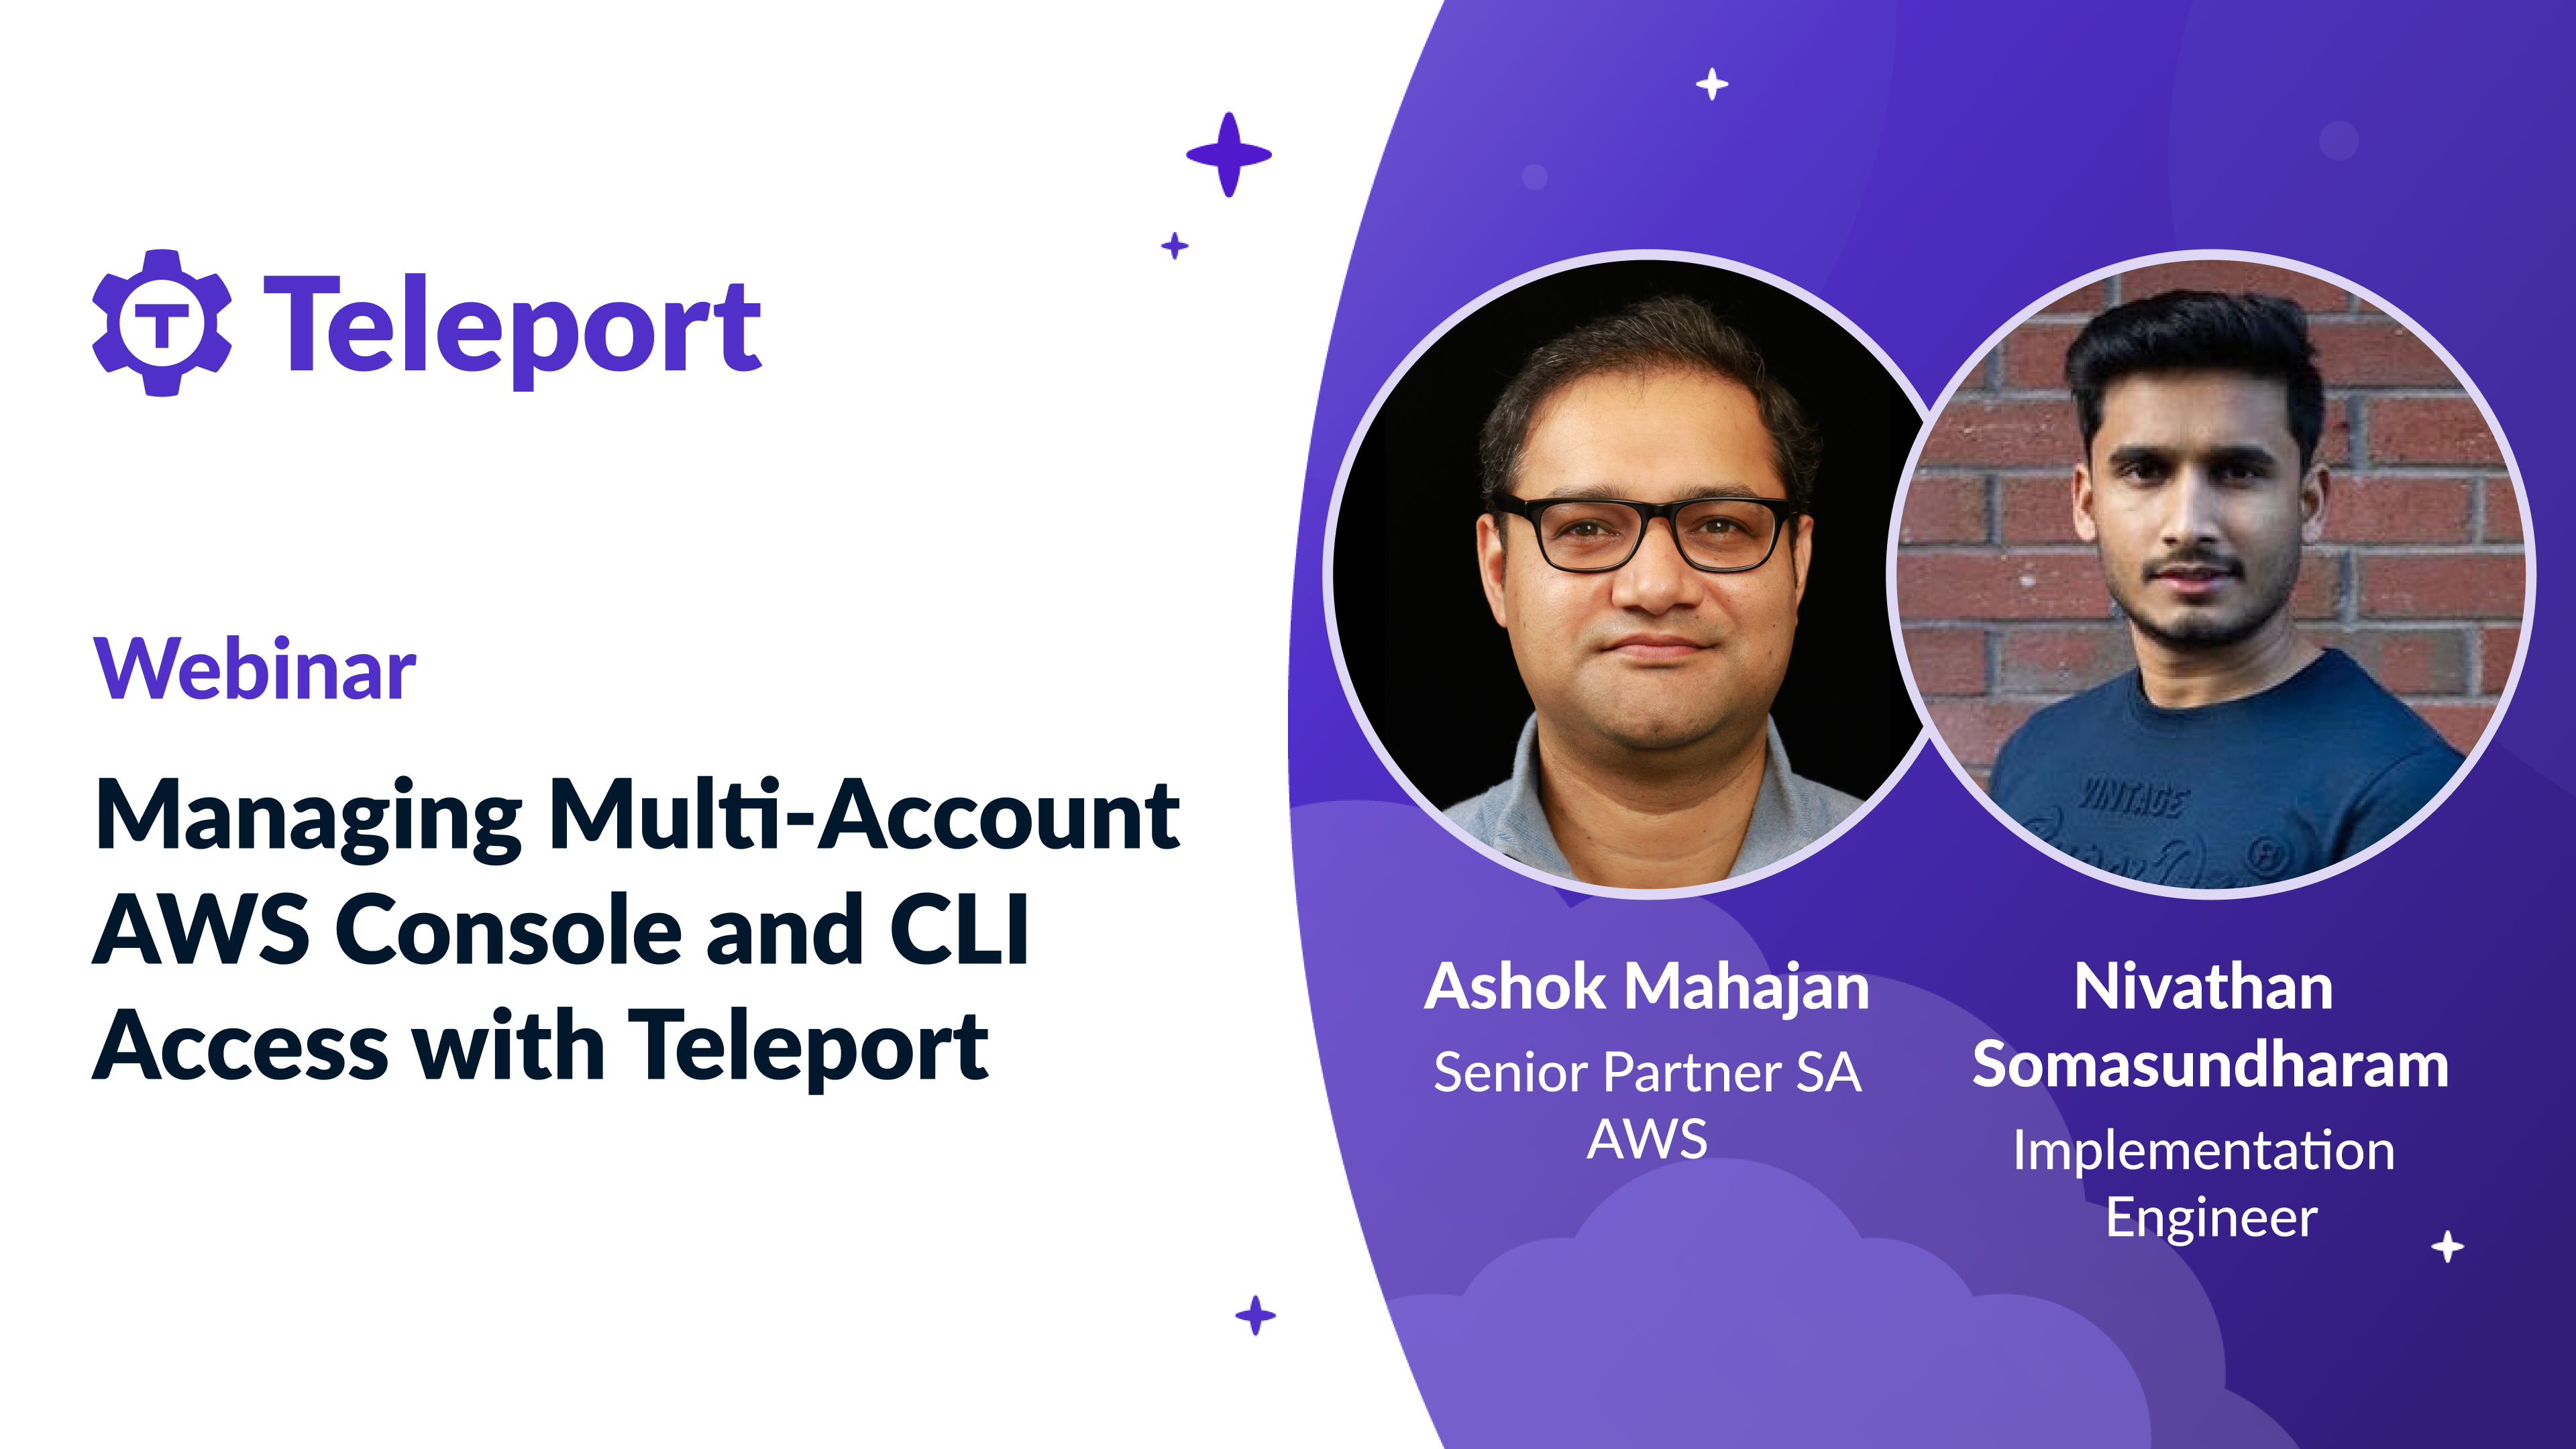 Managing Multi-Account AWS Console and CLI Access with Teleport